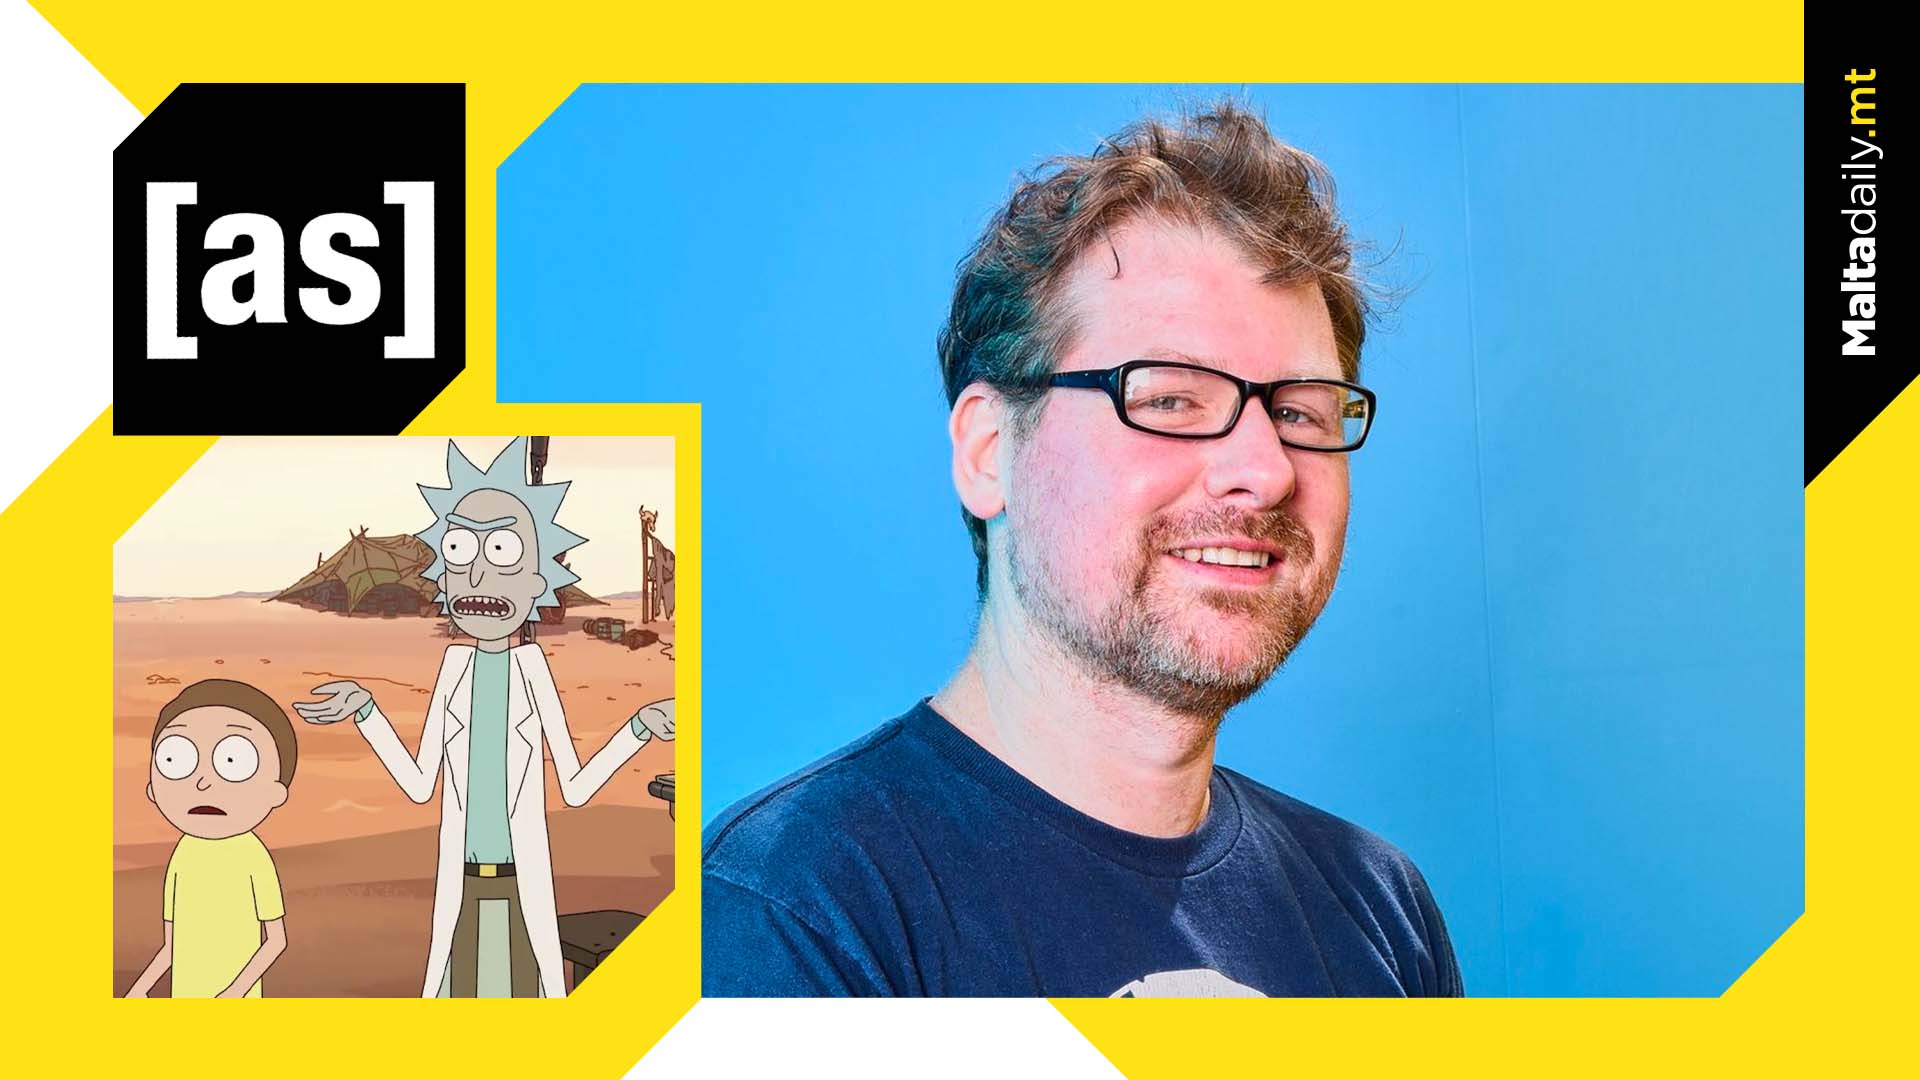 Adult Swim cut ties with Rick and Morty co-creator Justin Roiland